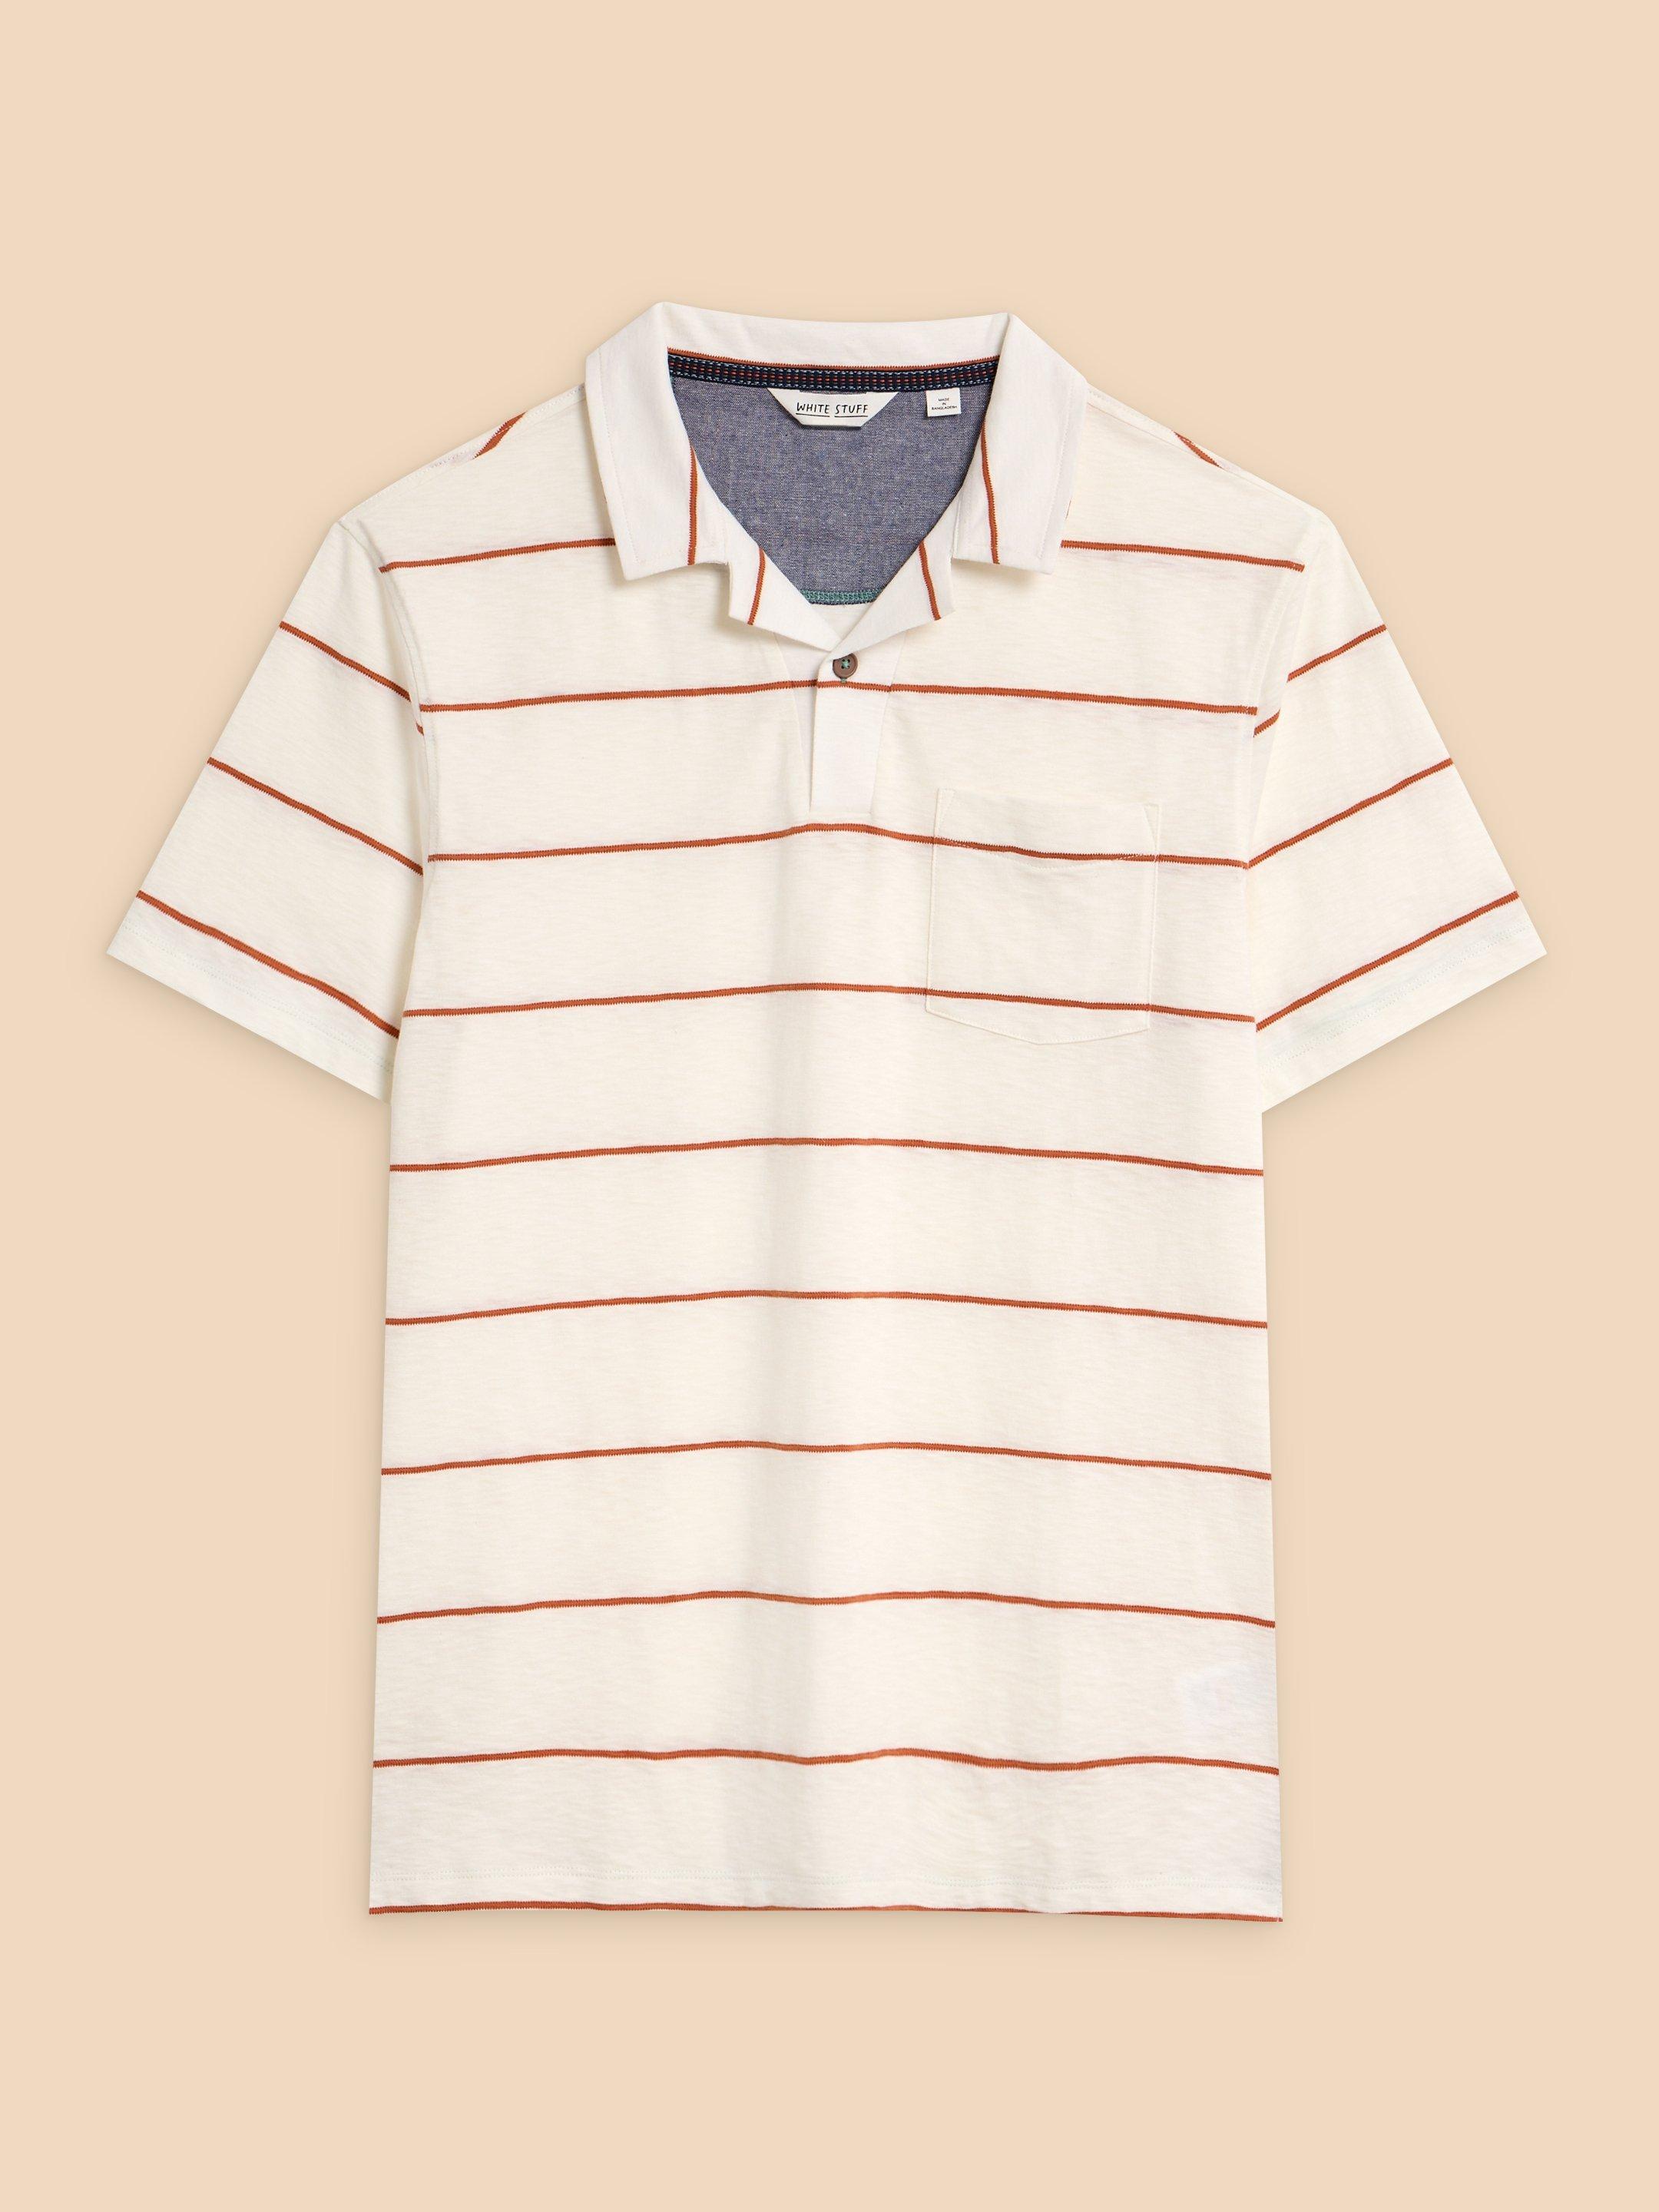 Jacquard Stripe Polo in NAT MLT - FLAT FRONT